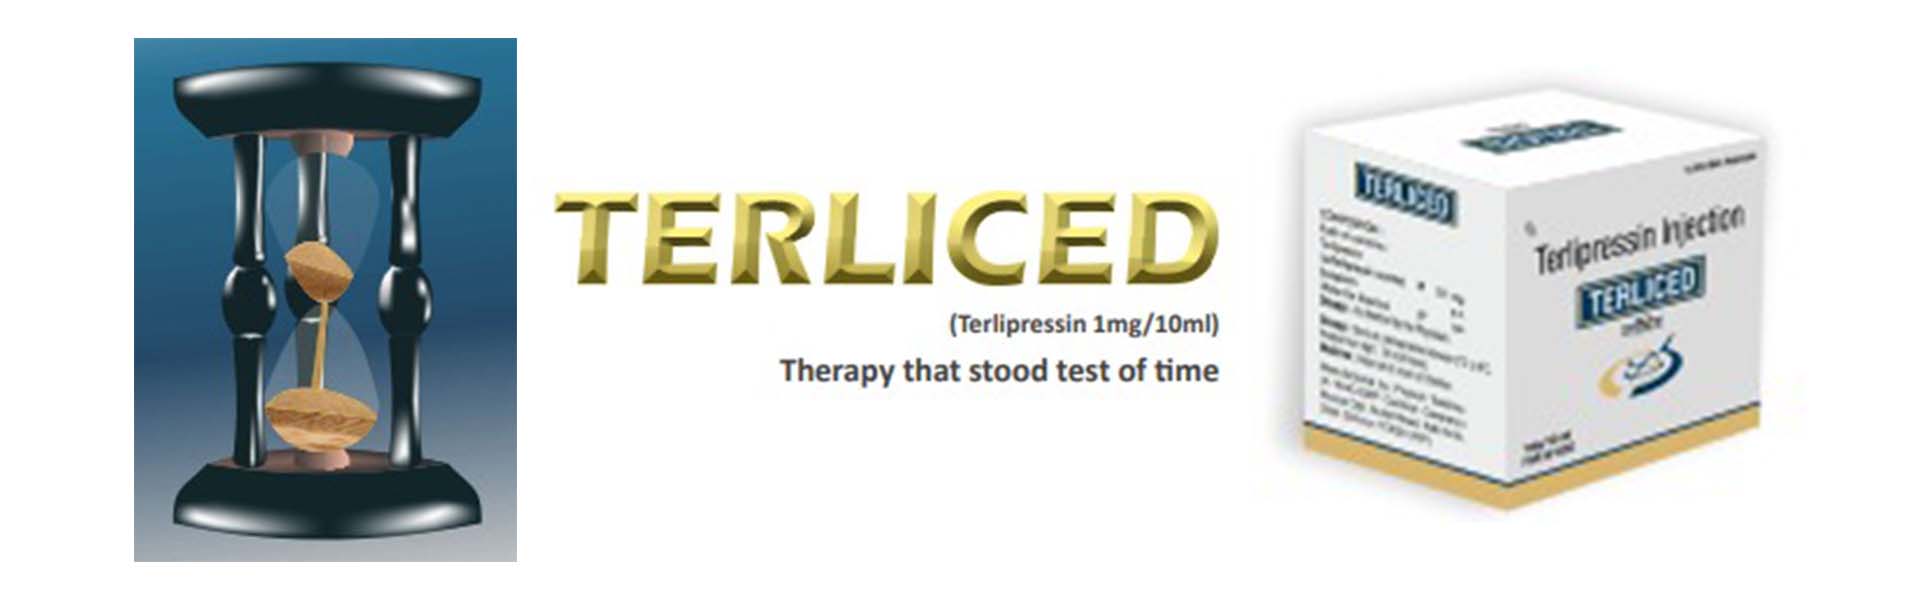 Terliced